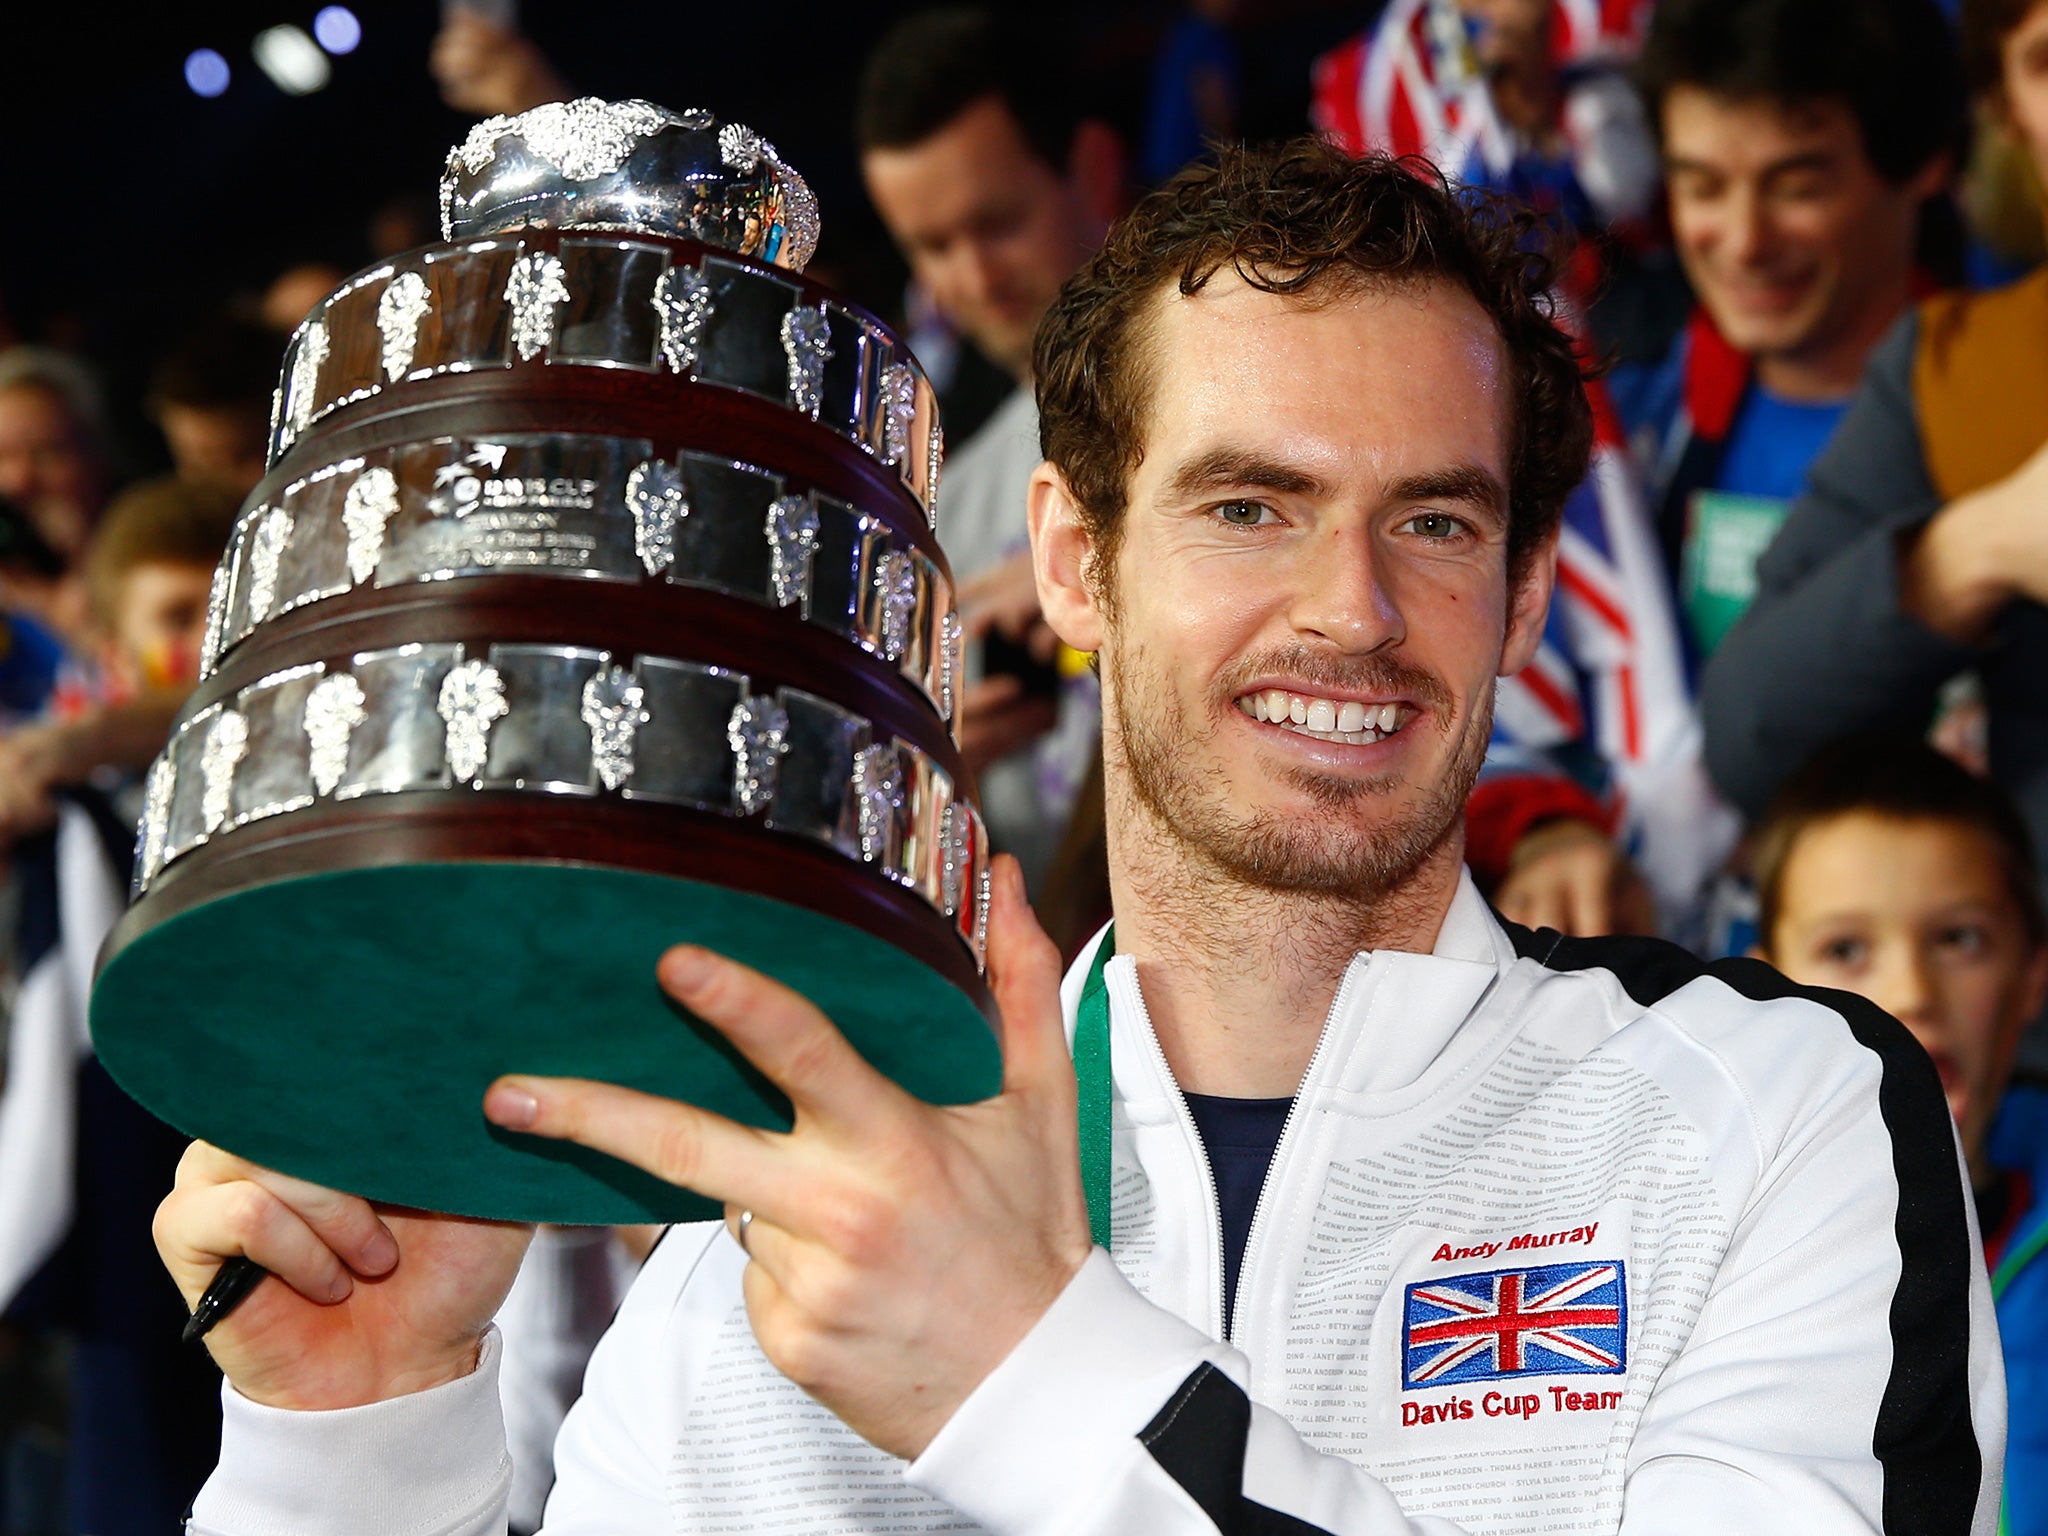 Murray tasted victory with Britain's Davis Cup team last year